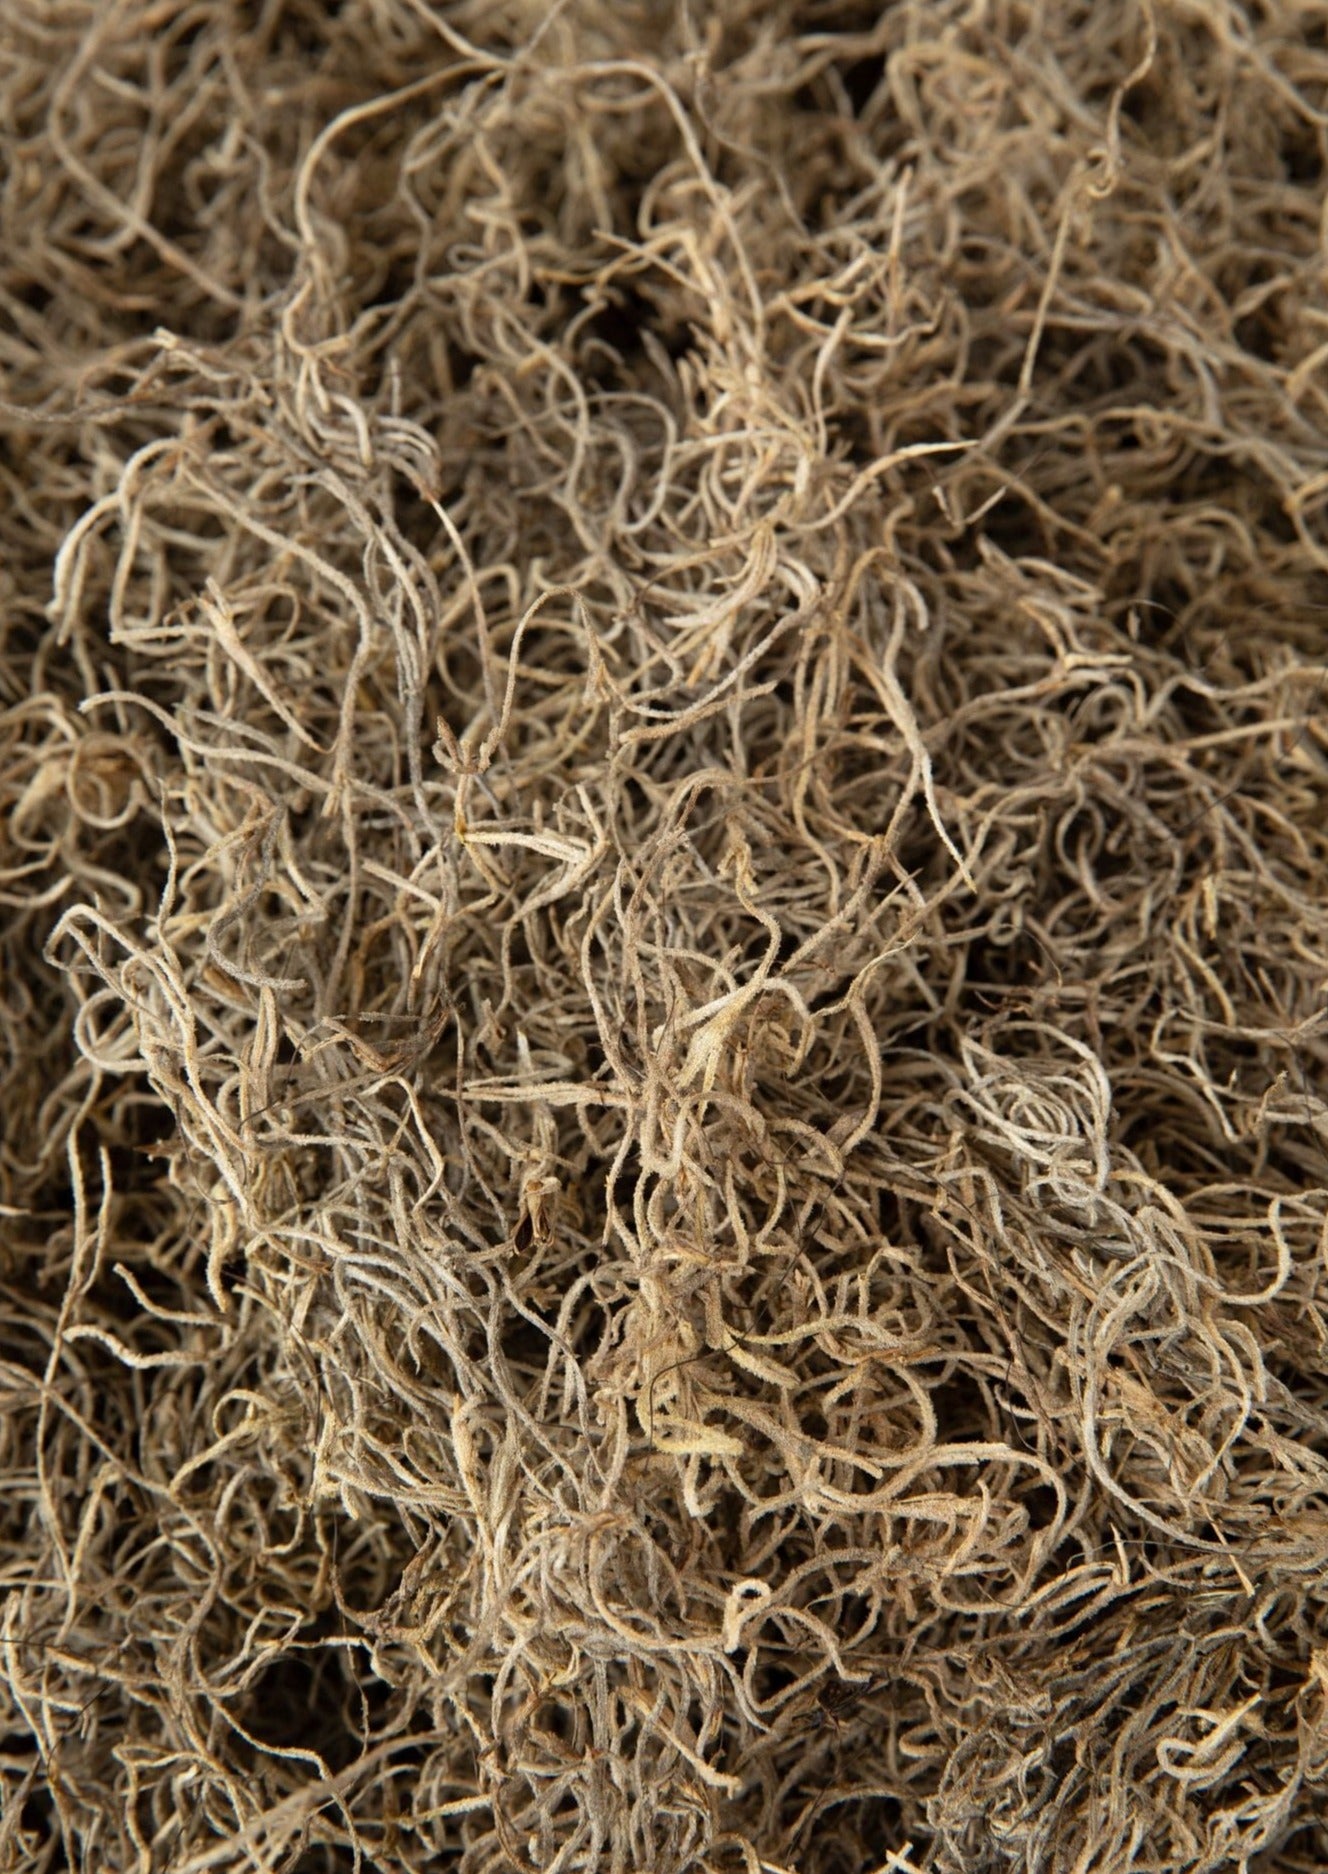 Closeup View of Dried Spanish Moss in Natural Color